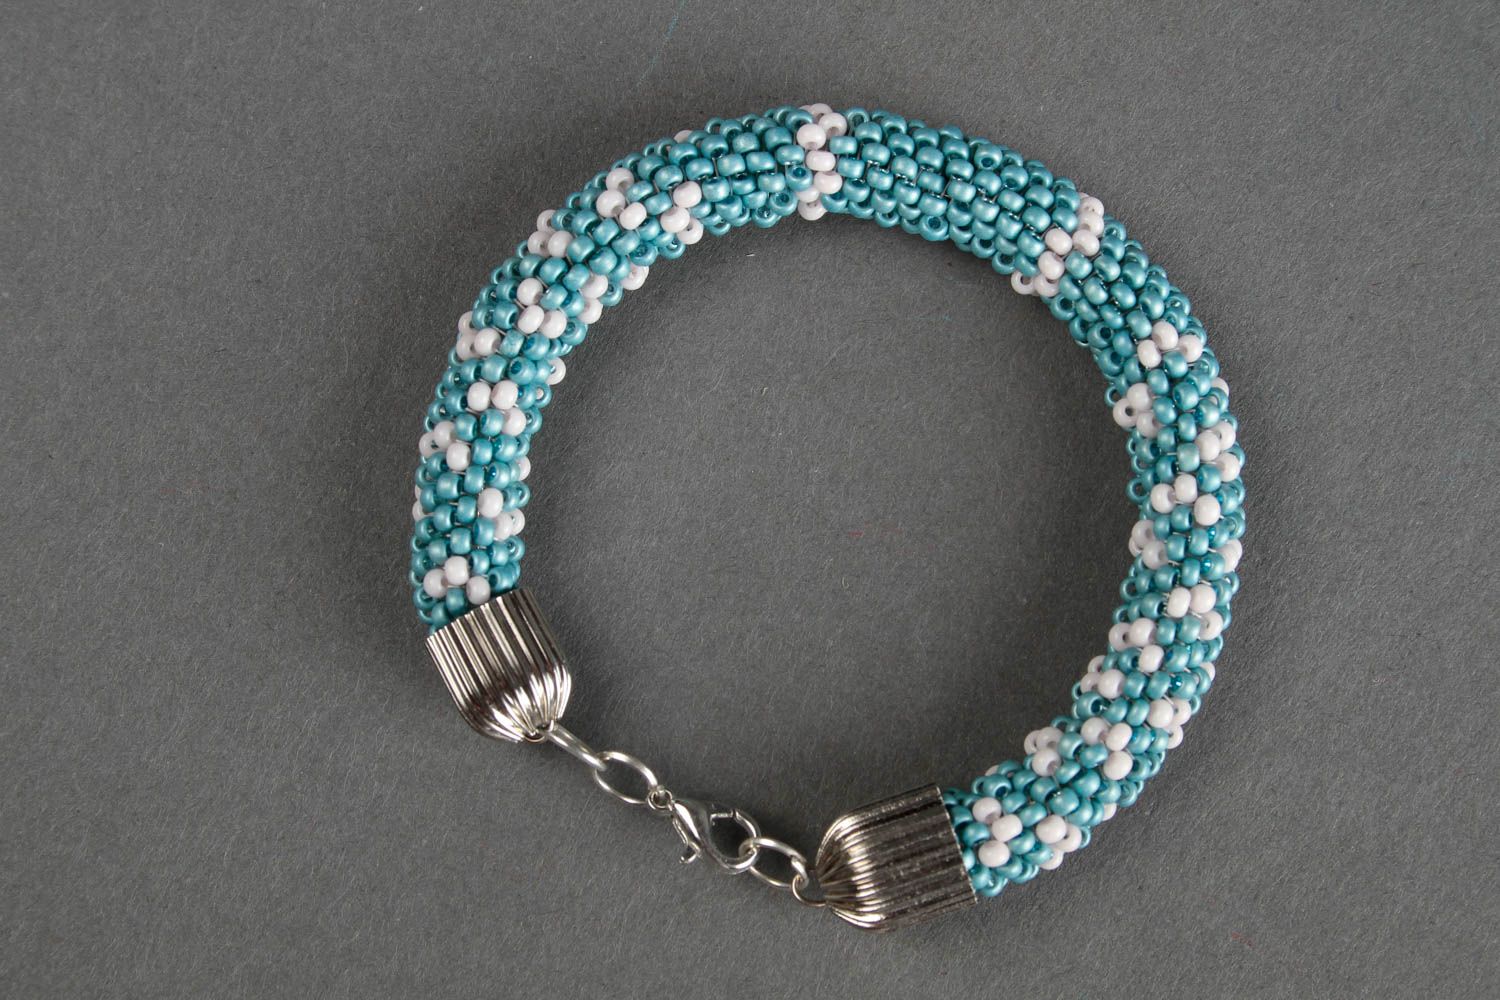 Handmade beaded cord bracelet in turquoise and white beads photo 5